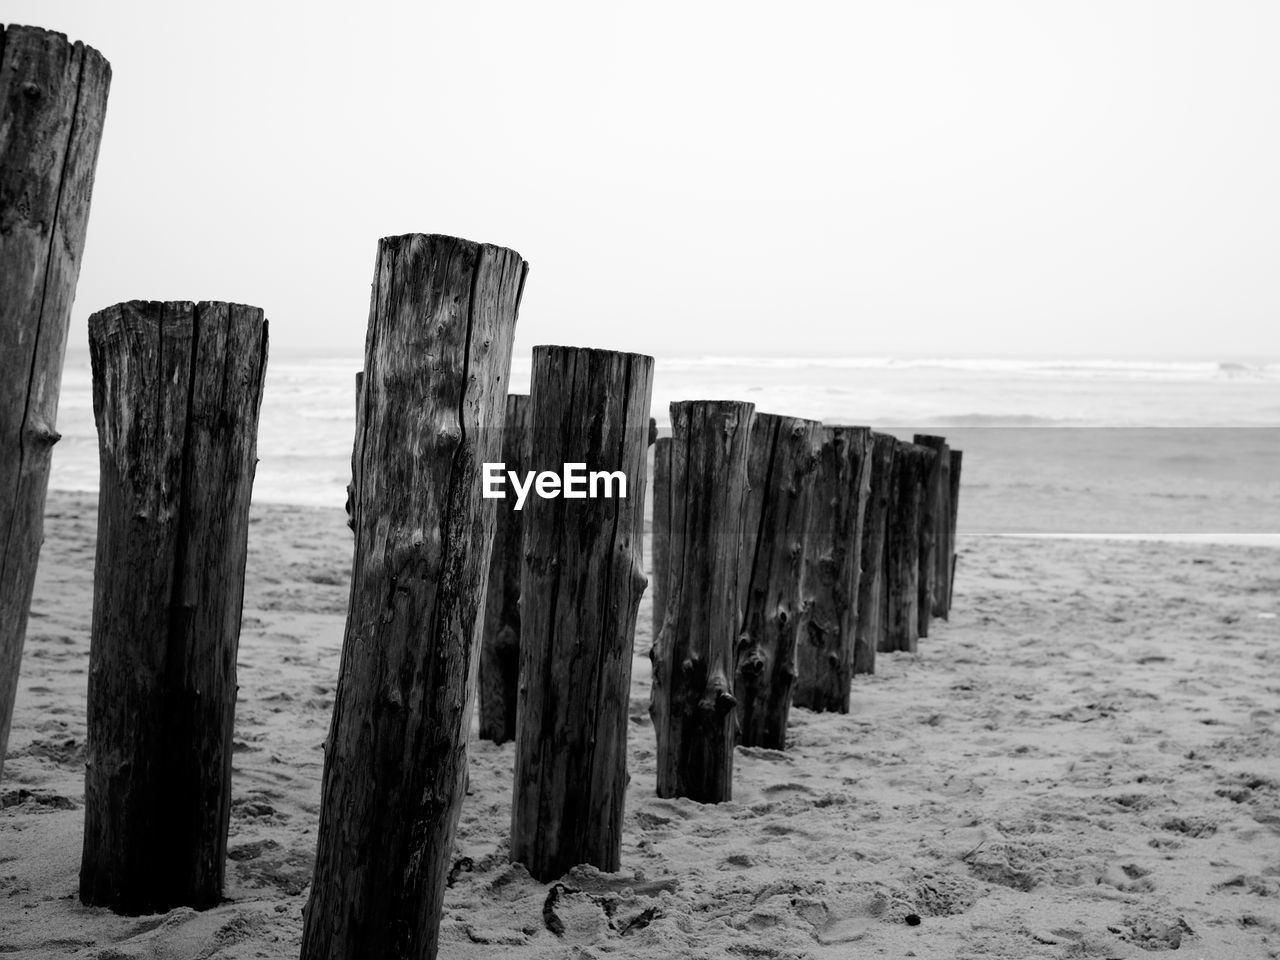 PANORAMIC VIEW OF WOODEN POSTS ON BEACH AGAINST CLEAR SKY